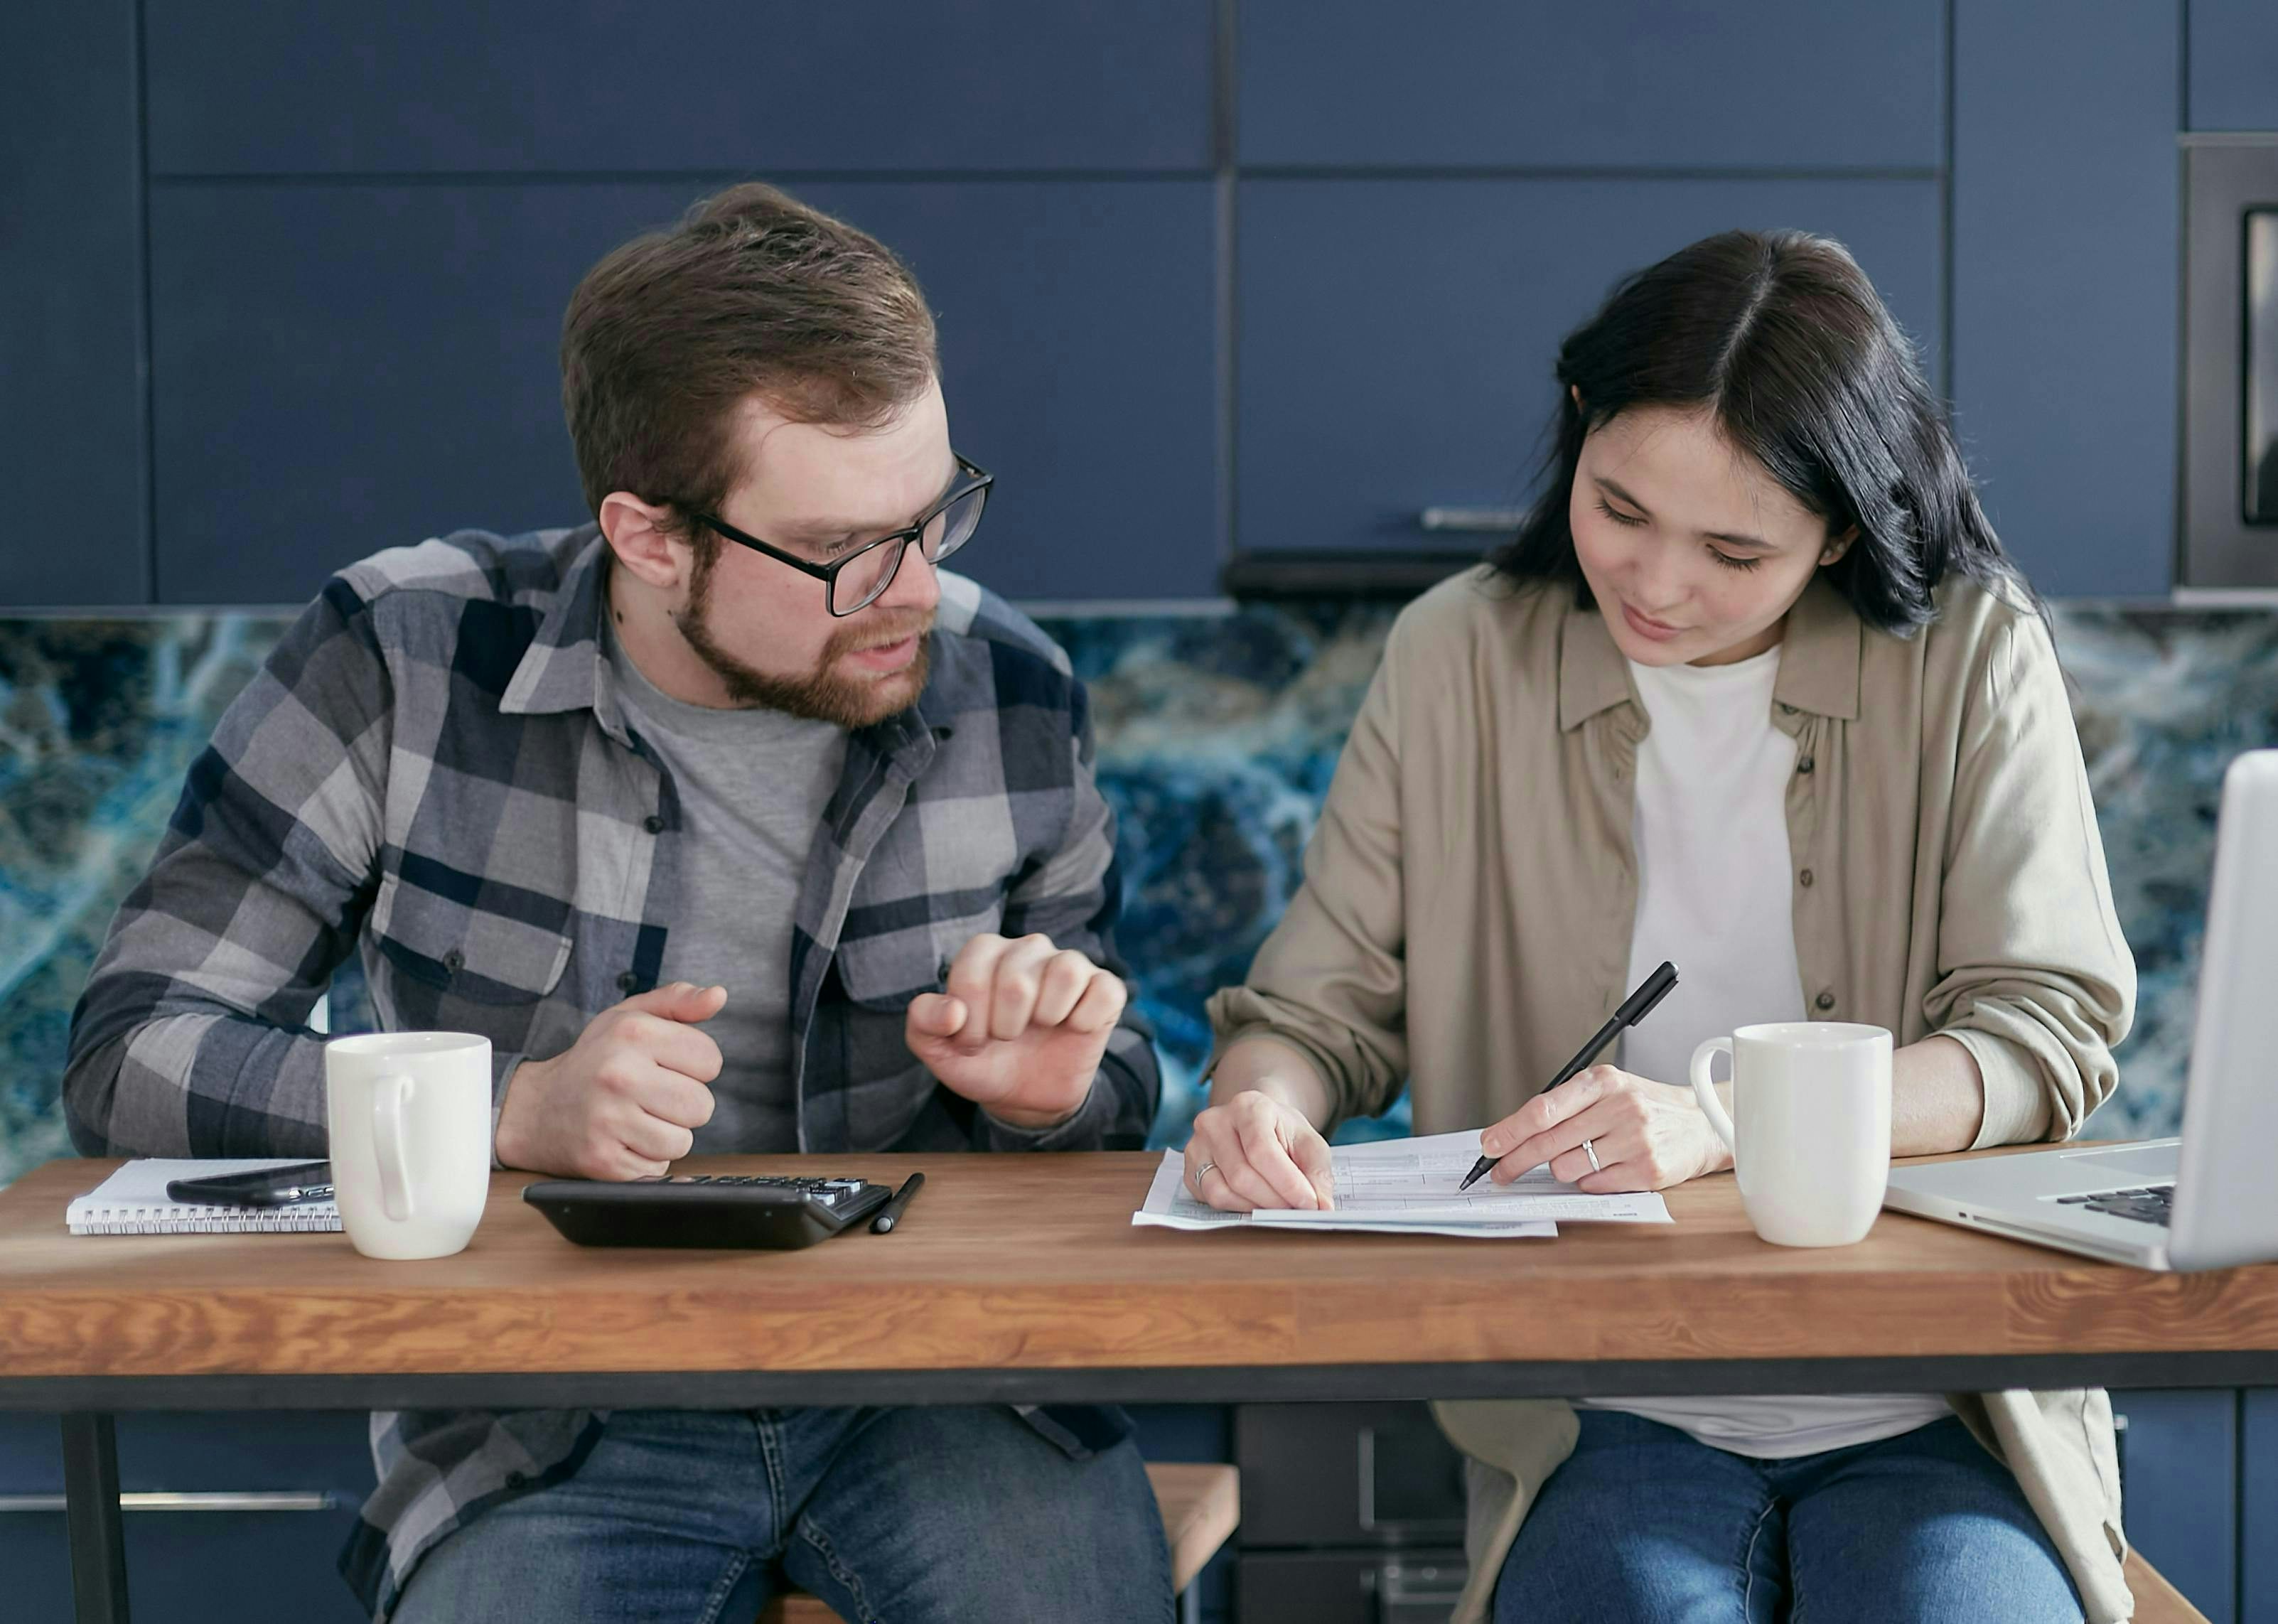 Man and woman sitting together, reviewing and discussing their tax documents spread out on a table.